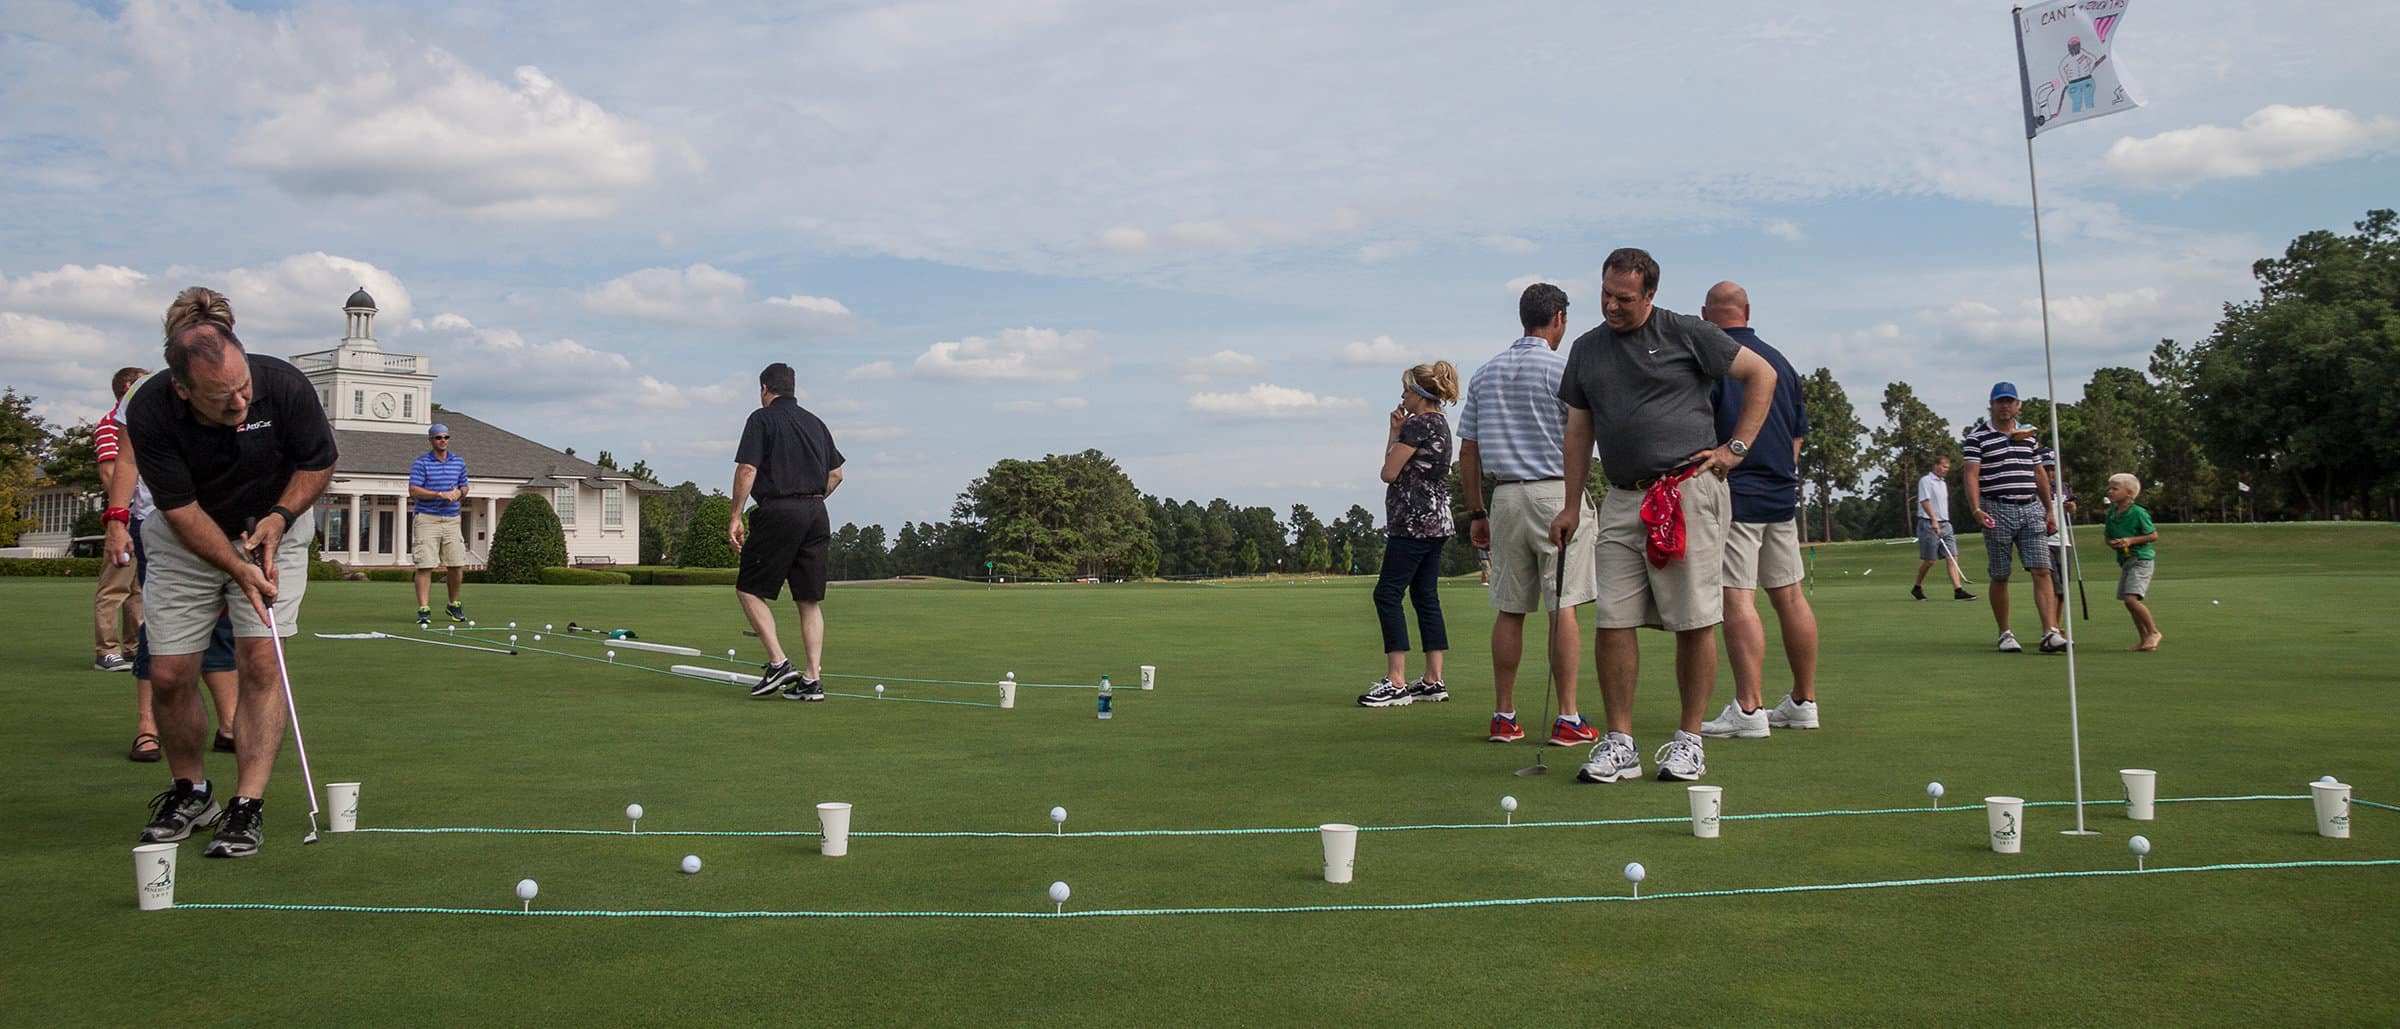 Golf putting contest and group activities at Pinehurst golf courses